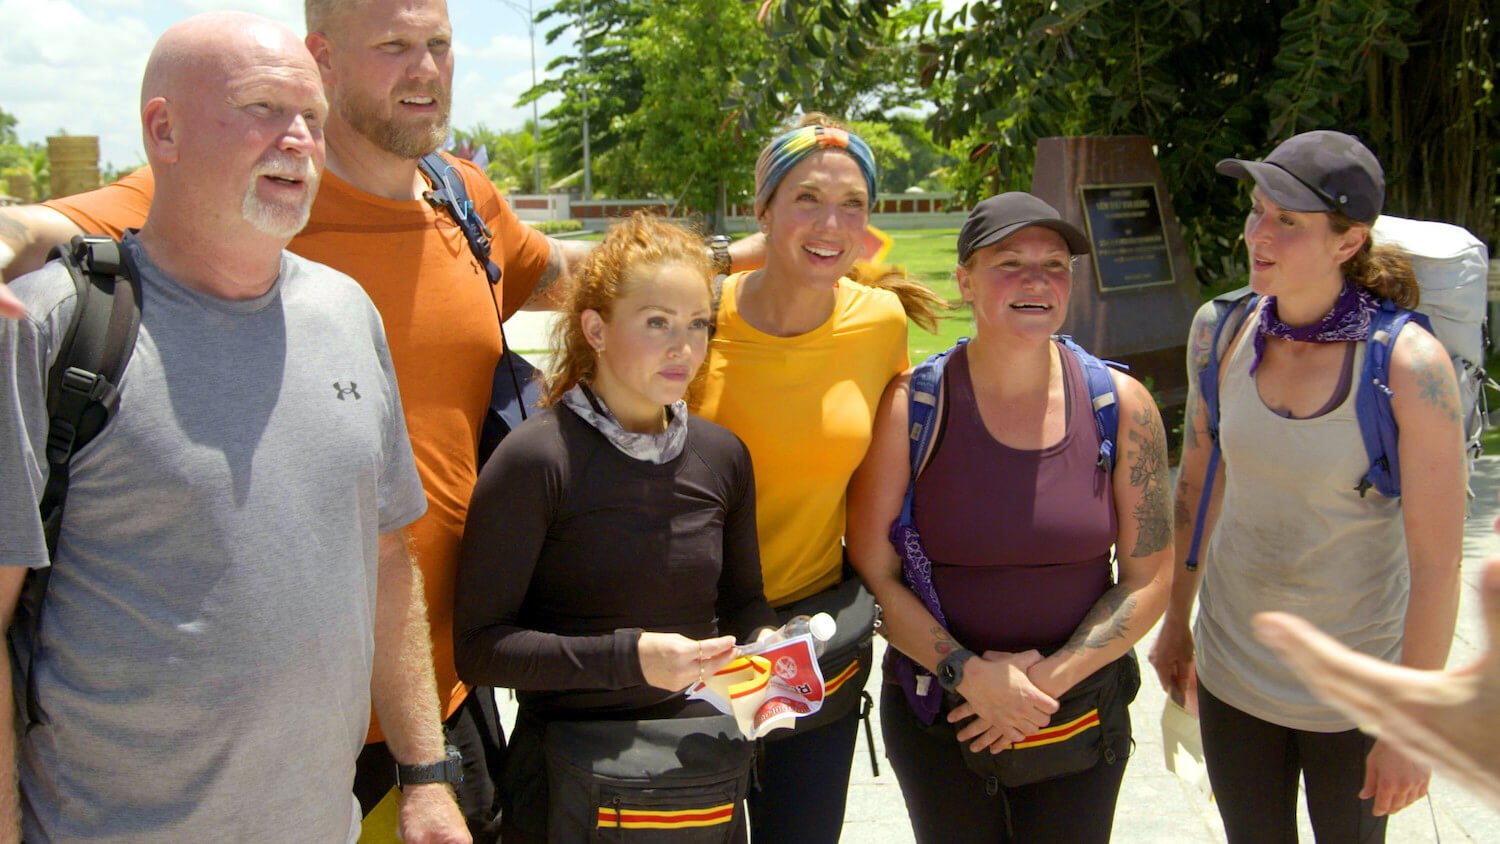 'The Amazing Race' Season 35 contestants standing next to each other in Vietnam while awaiting instructions